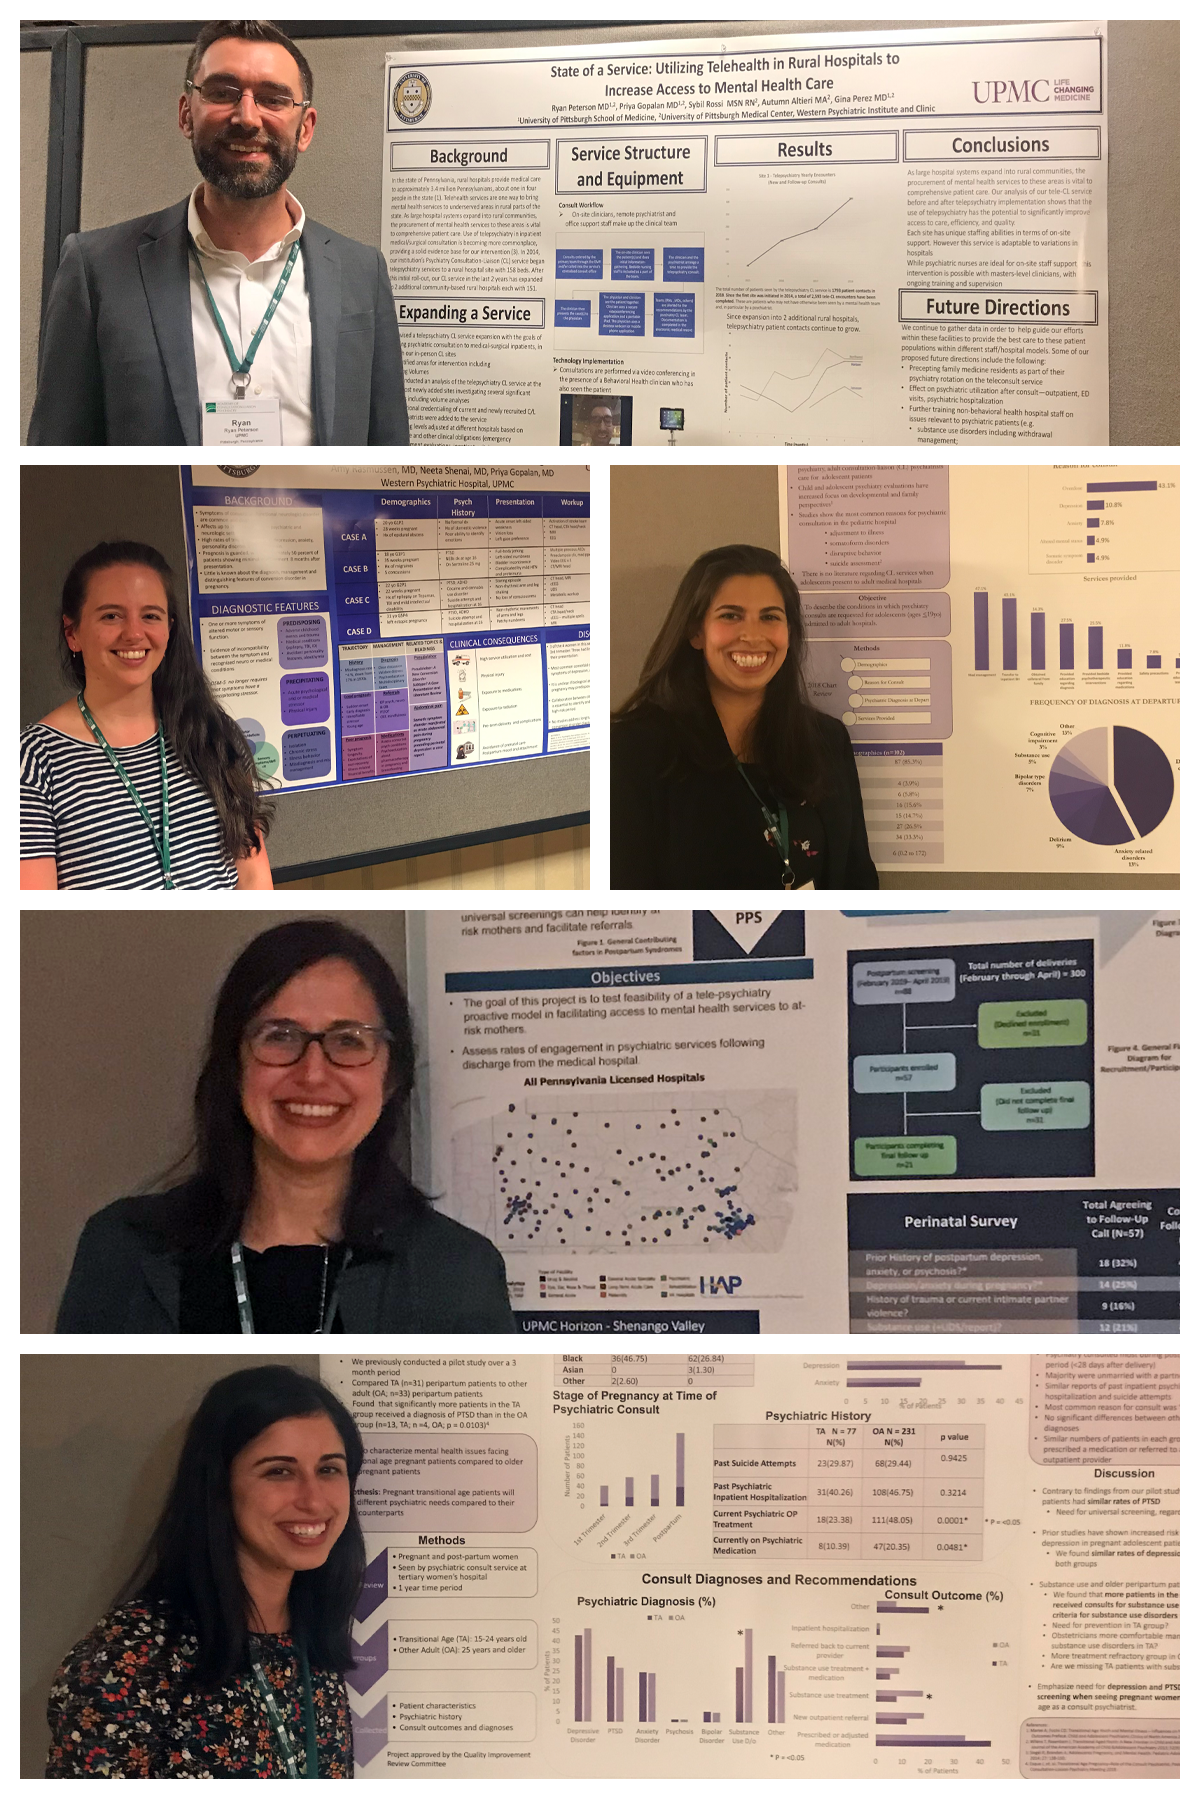 2019 ACLP Poster Session 1